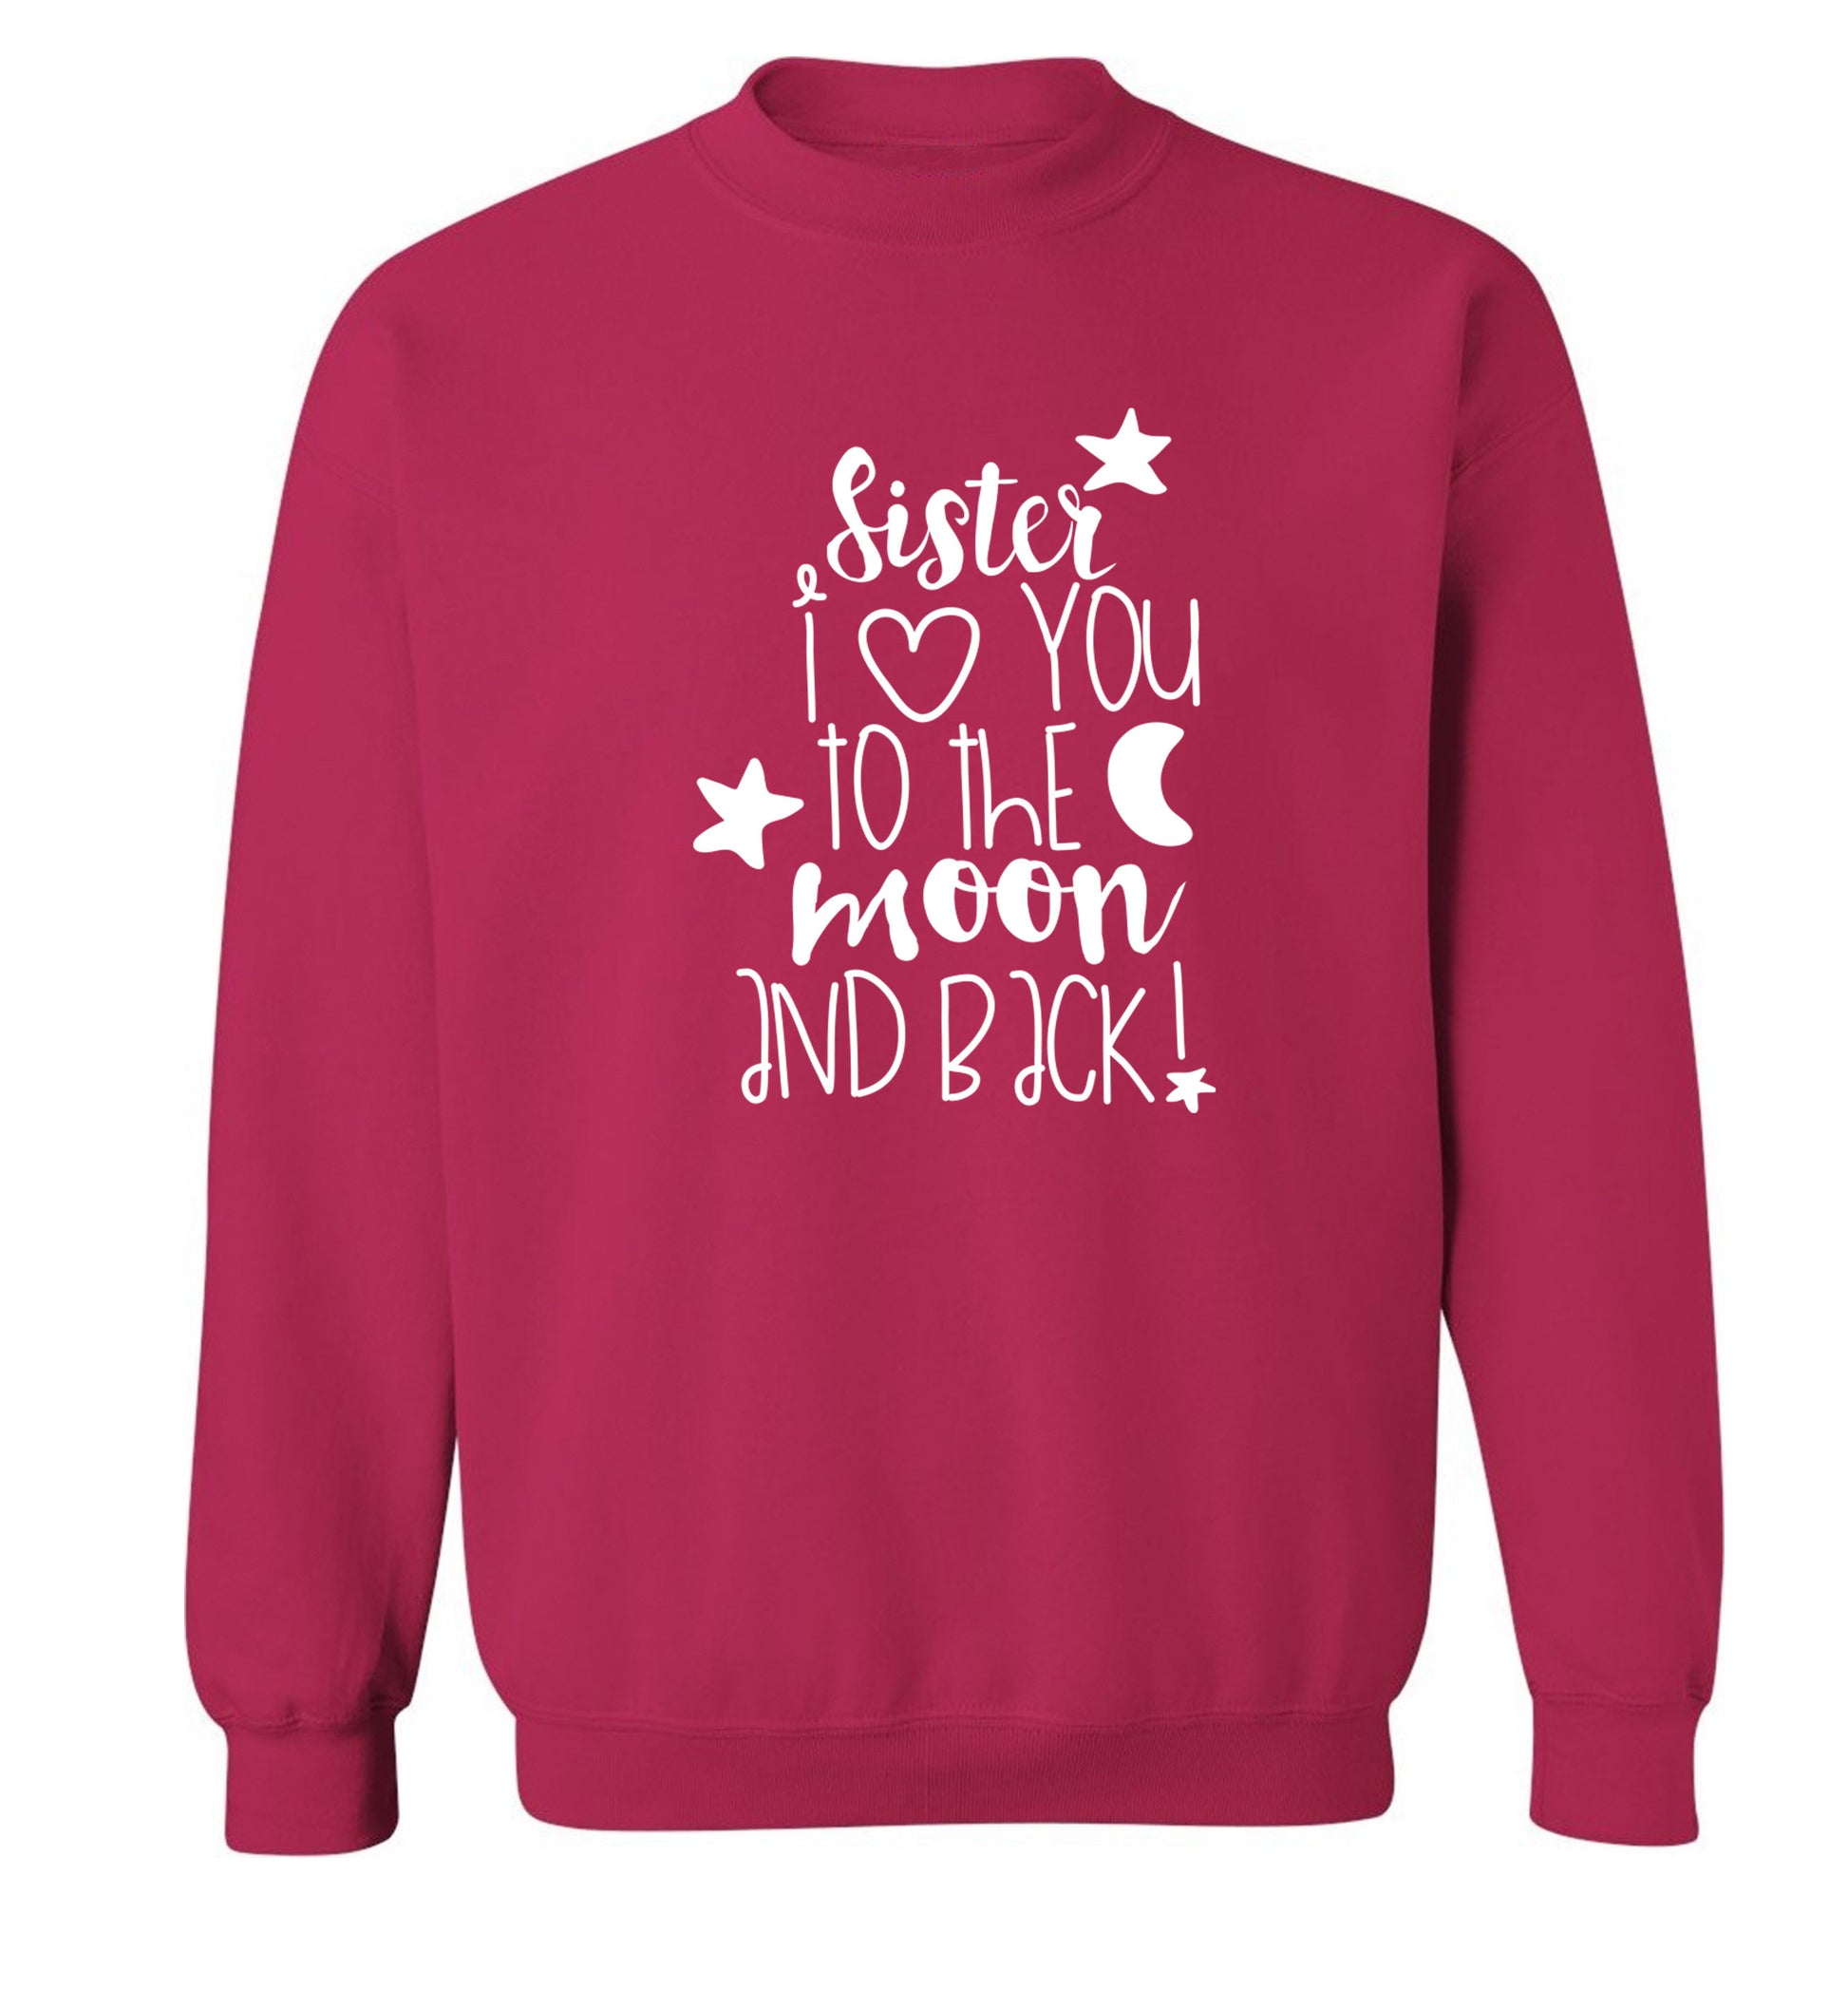 Sister I love you to the moon and back Adult's unisex pink  sweater XL